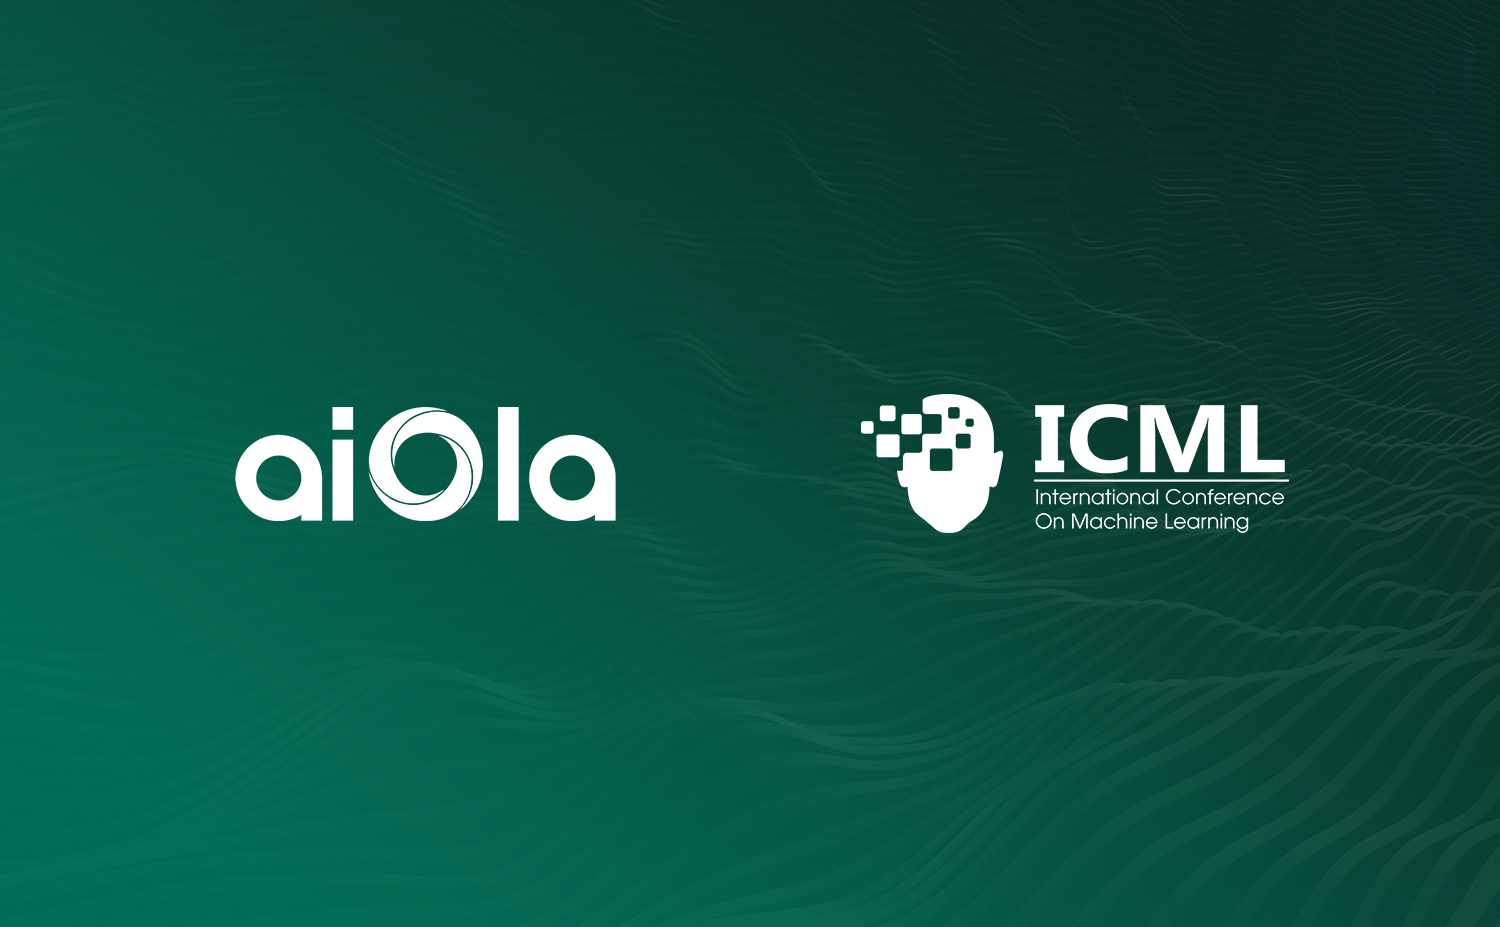 We are thrilled to announce that aiOla was accepted to attend and present at the International Conference for Machine Learning (ICML). Only one quarter of applicants are accepted to present at this conference, meaning aiOla was recognized for its unique contributions in the field of machine learning.